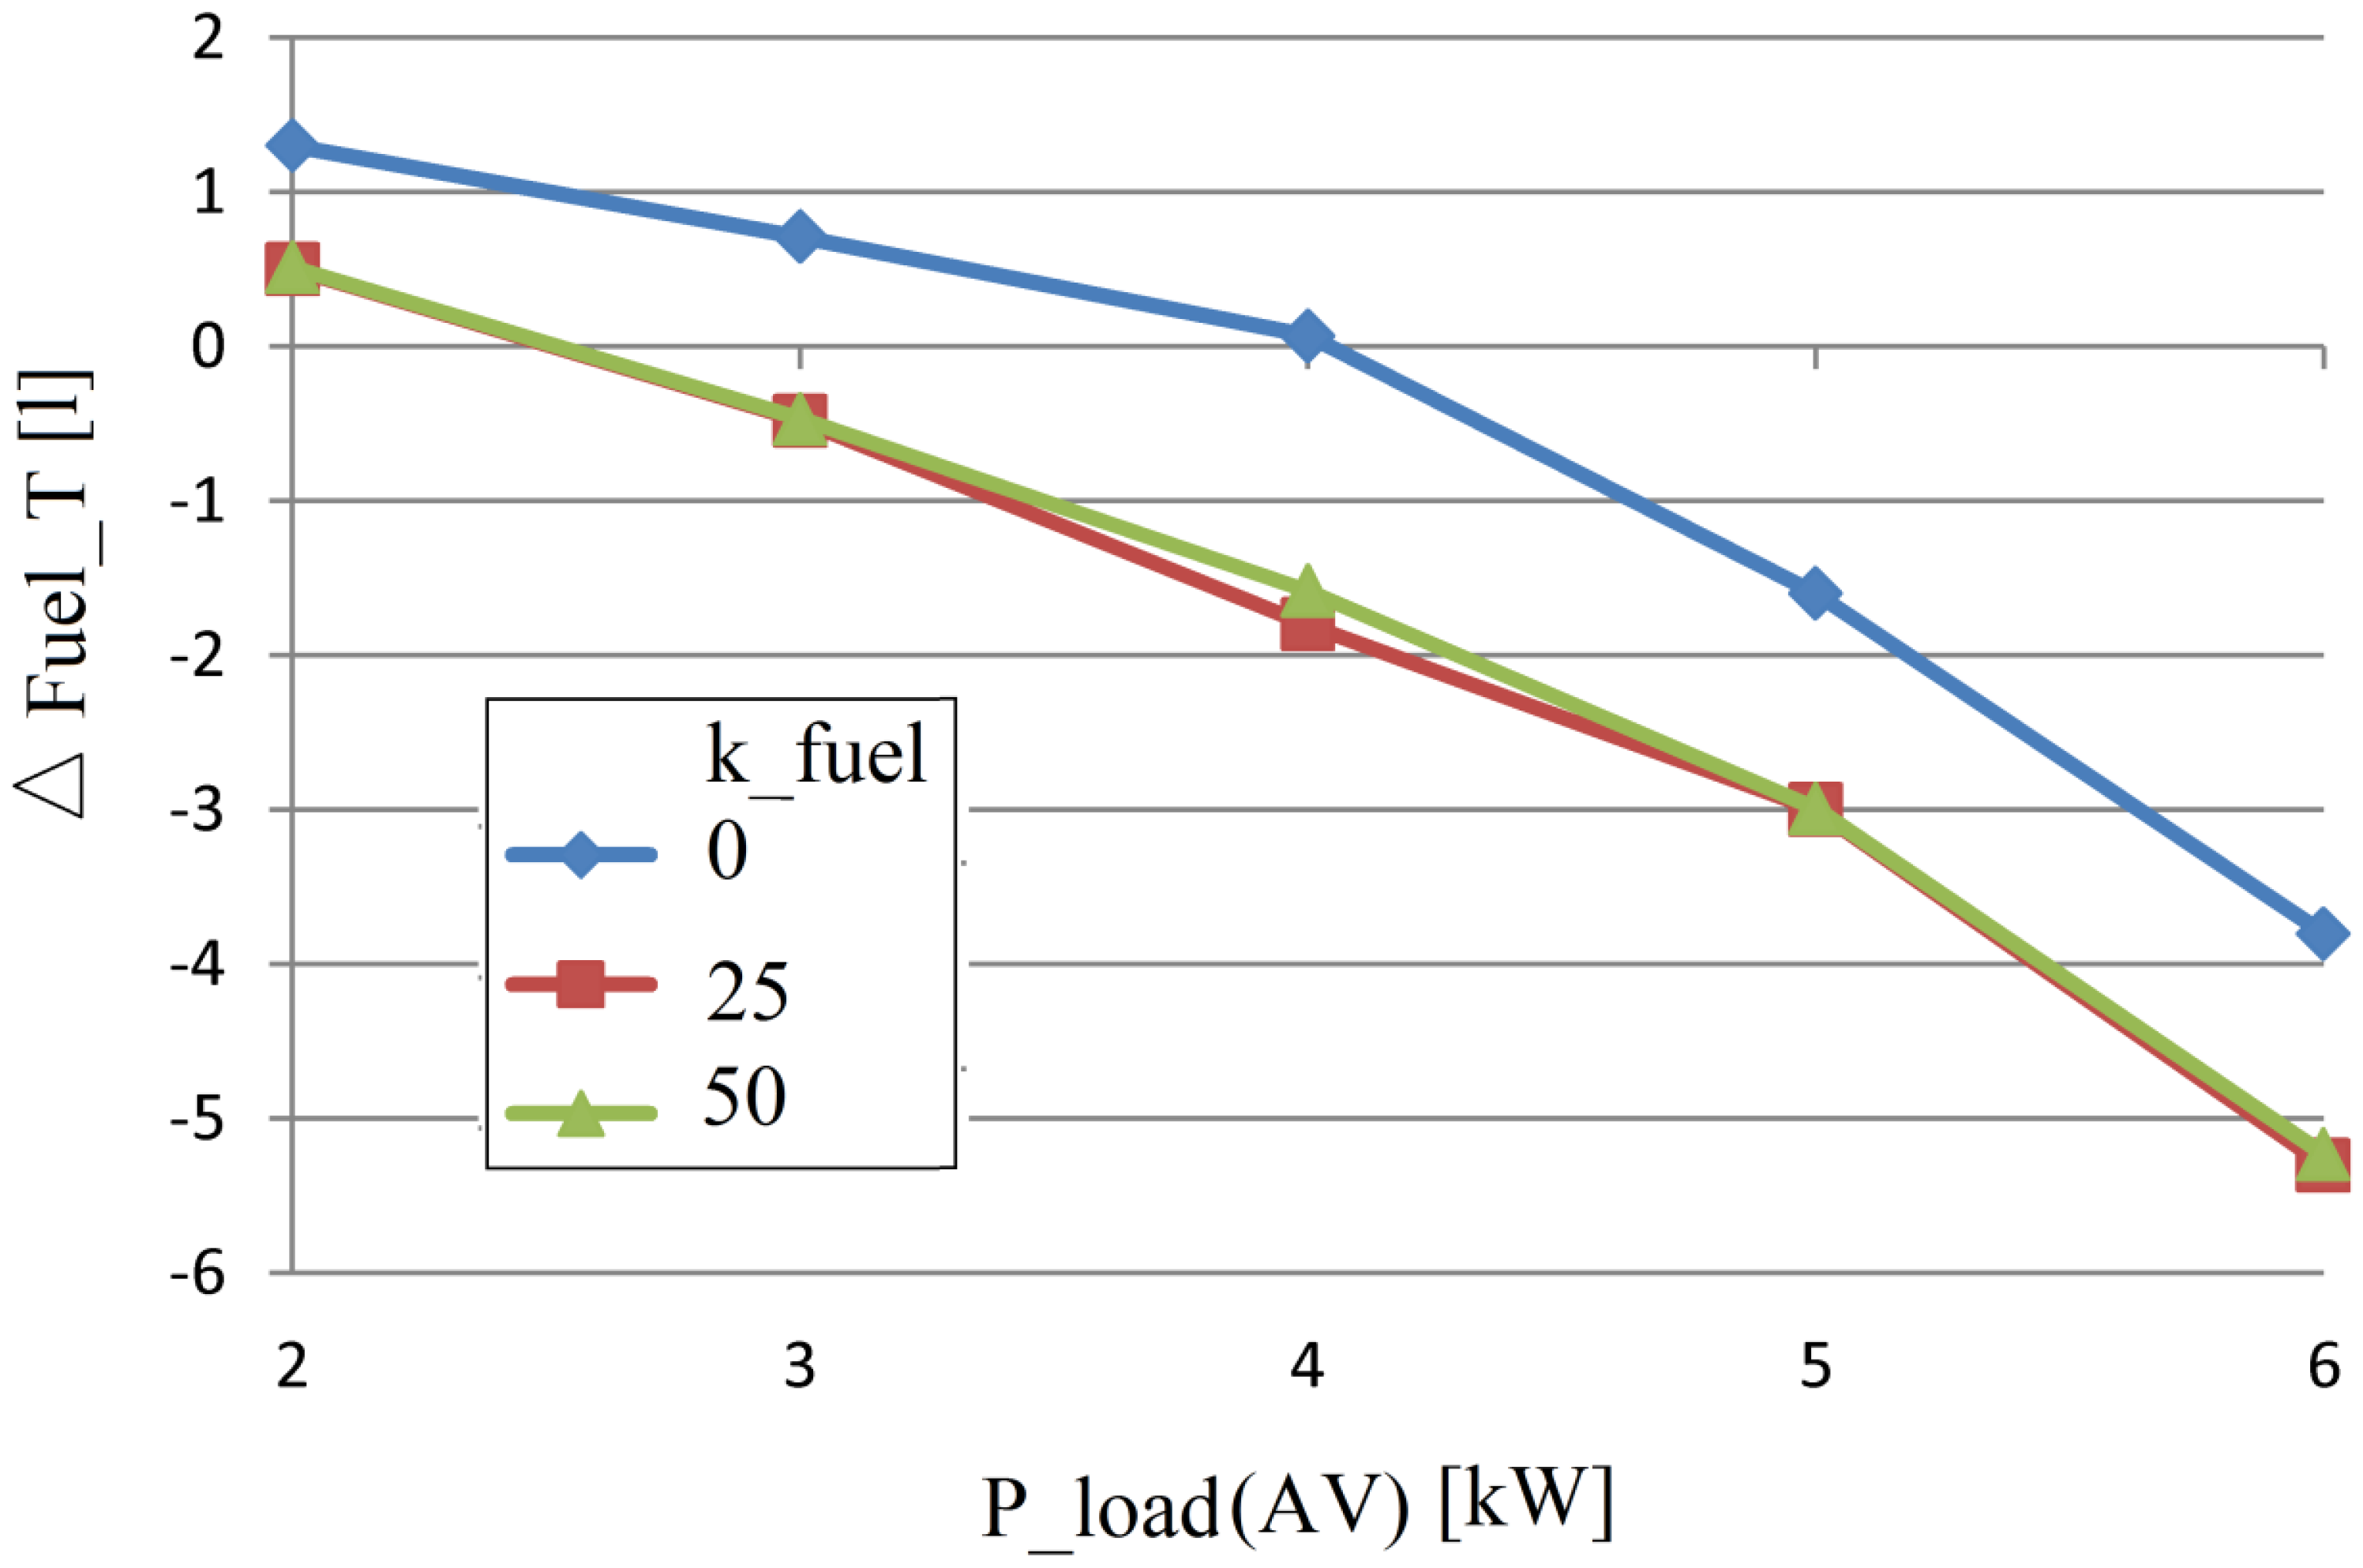 Energies Free Full Text Experimental Comparison Of Three Real Time Optimization Strategies Applied To Renewable Fc Based Hybrid Power Systems Based On Load Following Control Html